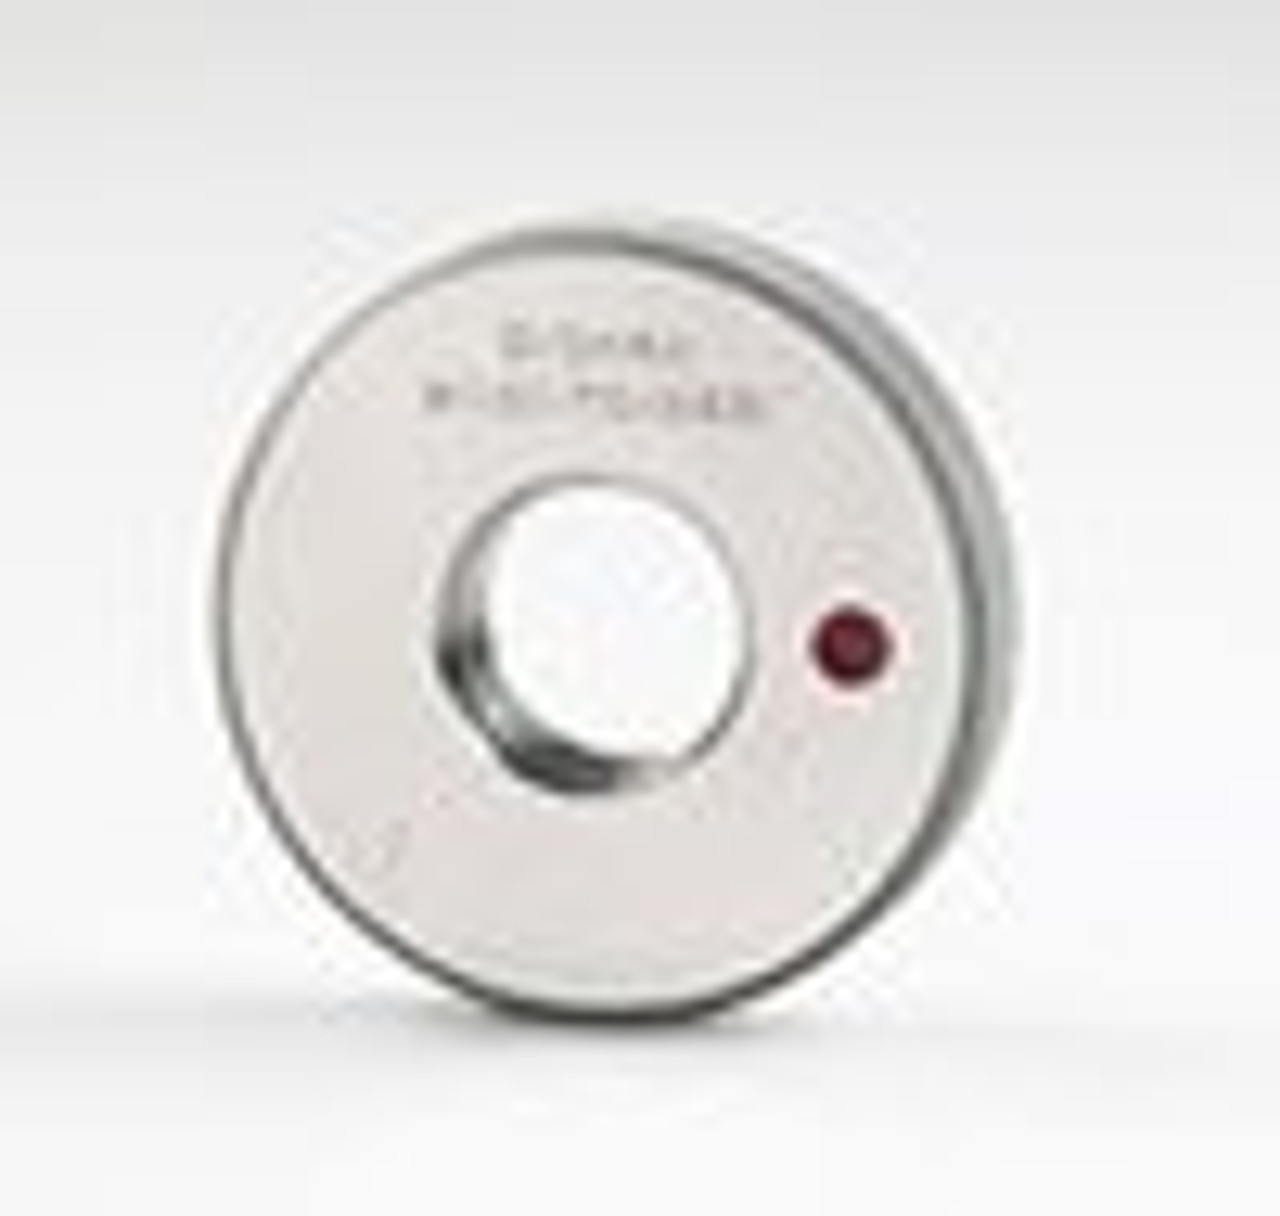 BSW 7/8" - 9 NO GO Thread Ring Gauge - (BSW7/8RG-NG)